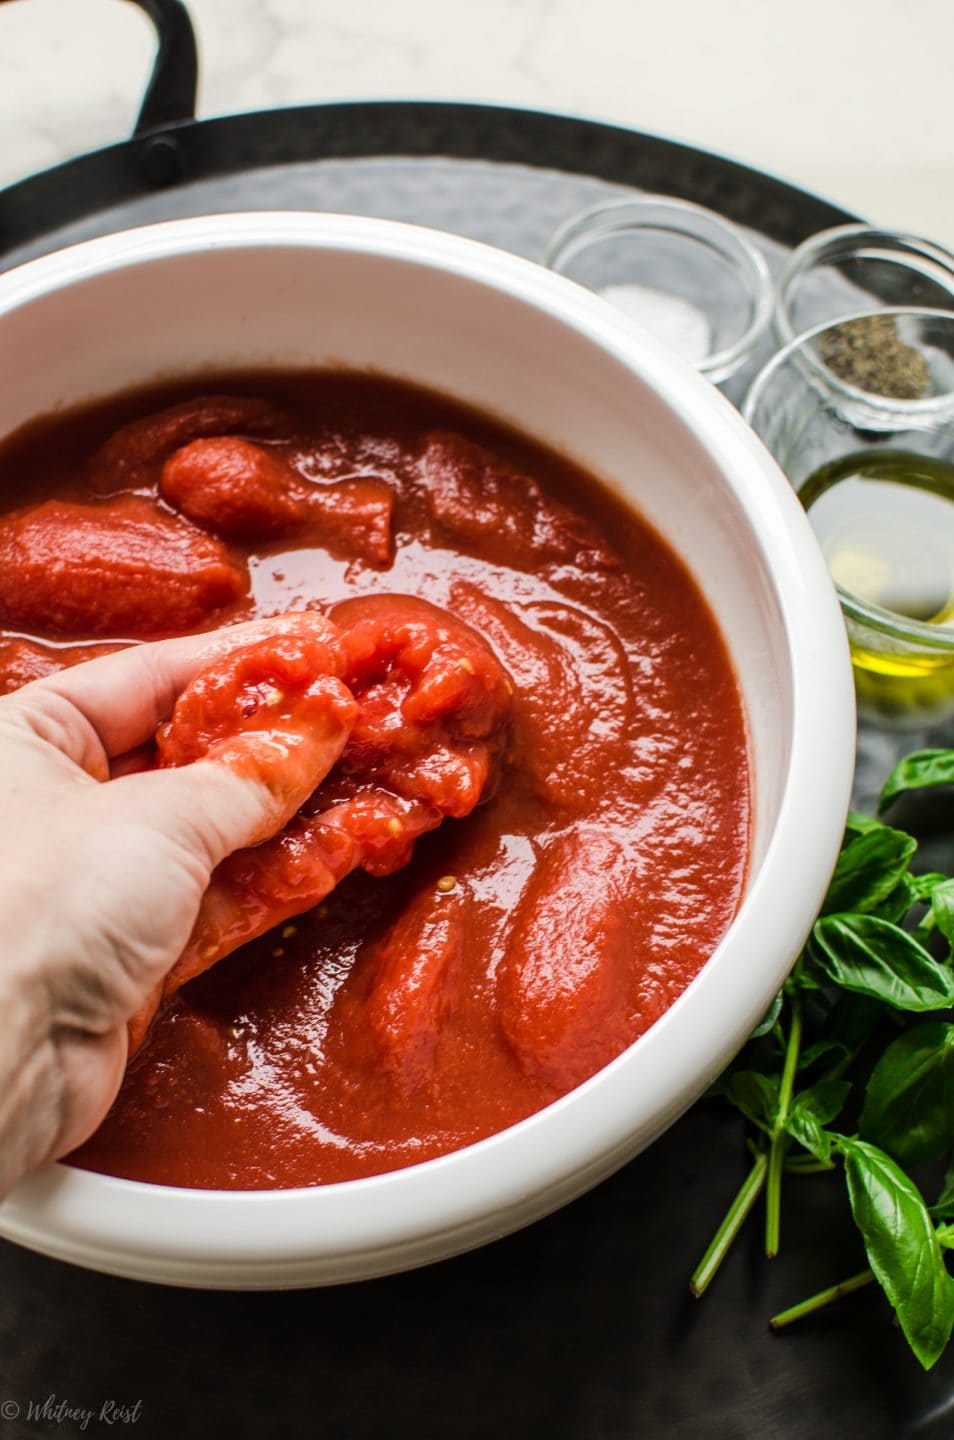 A hand squeezing a whole tomato into a white bowl to demonstrate making pizza sauce. 